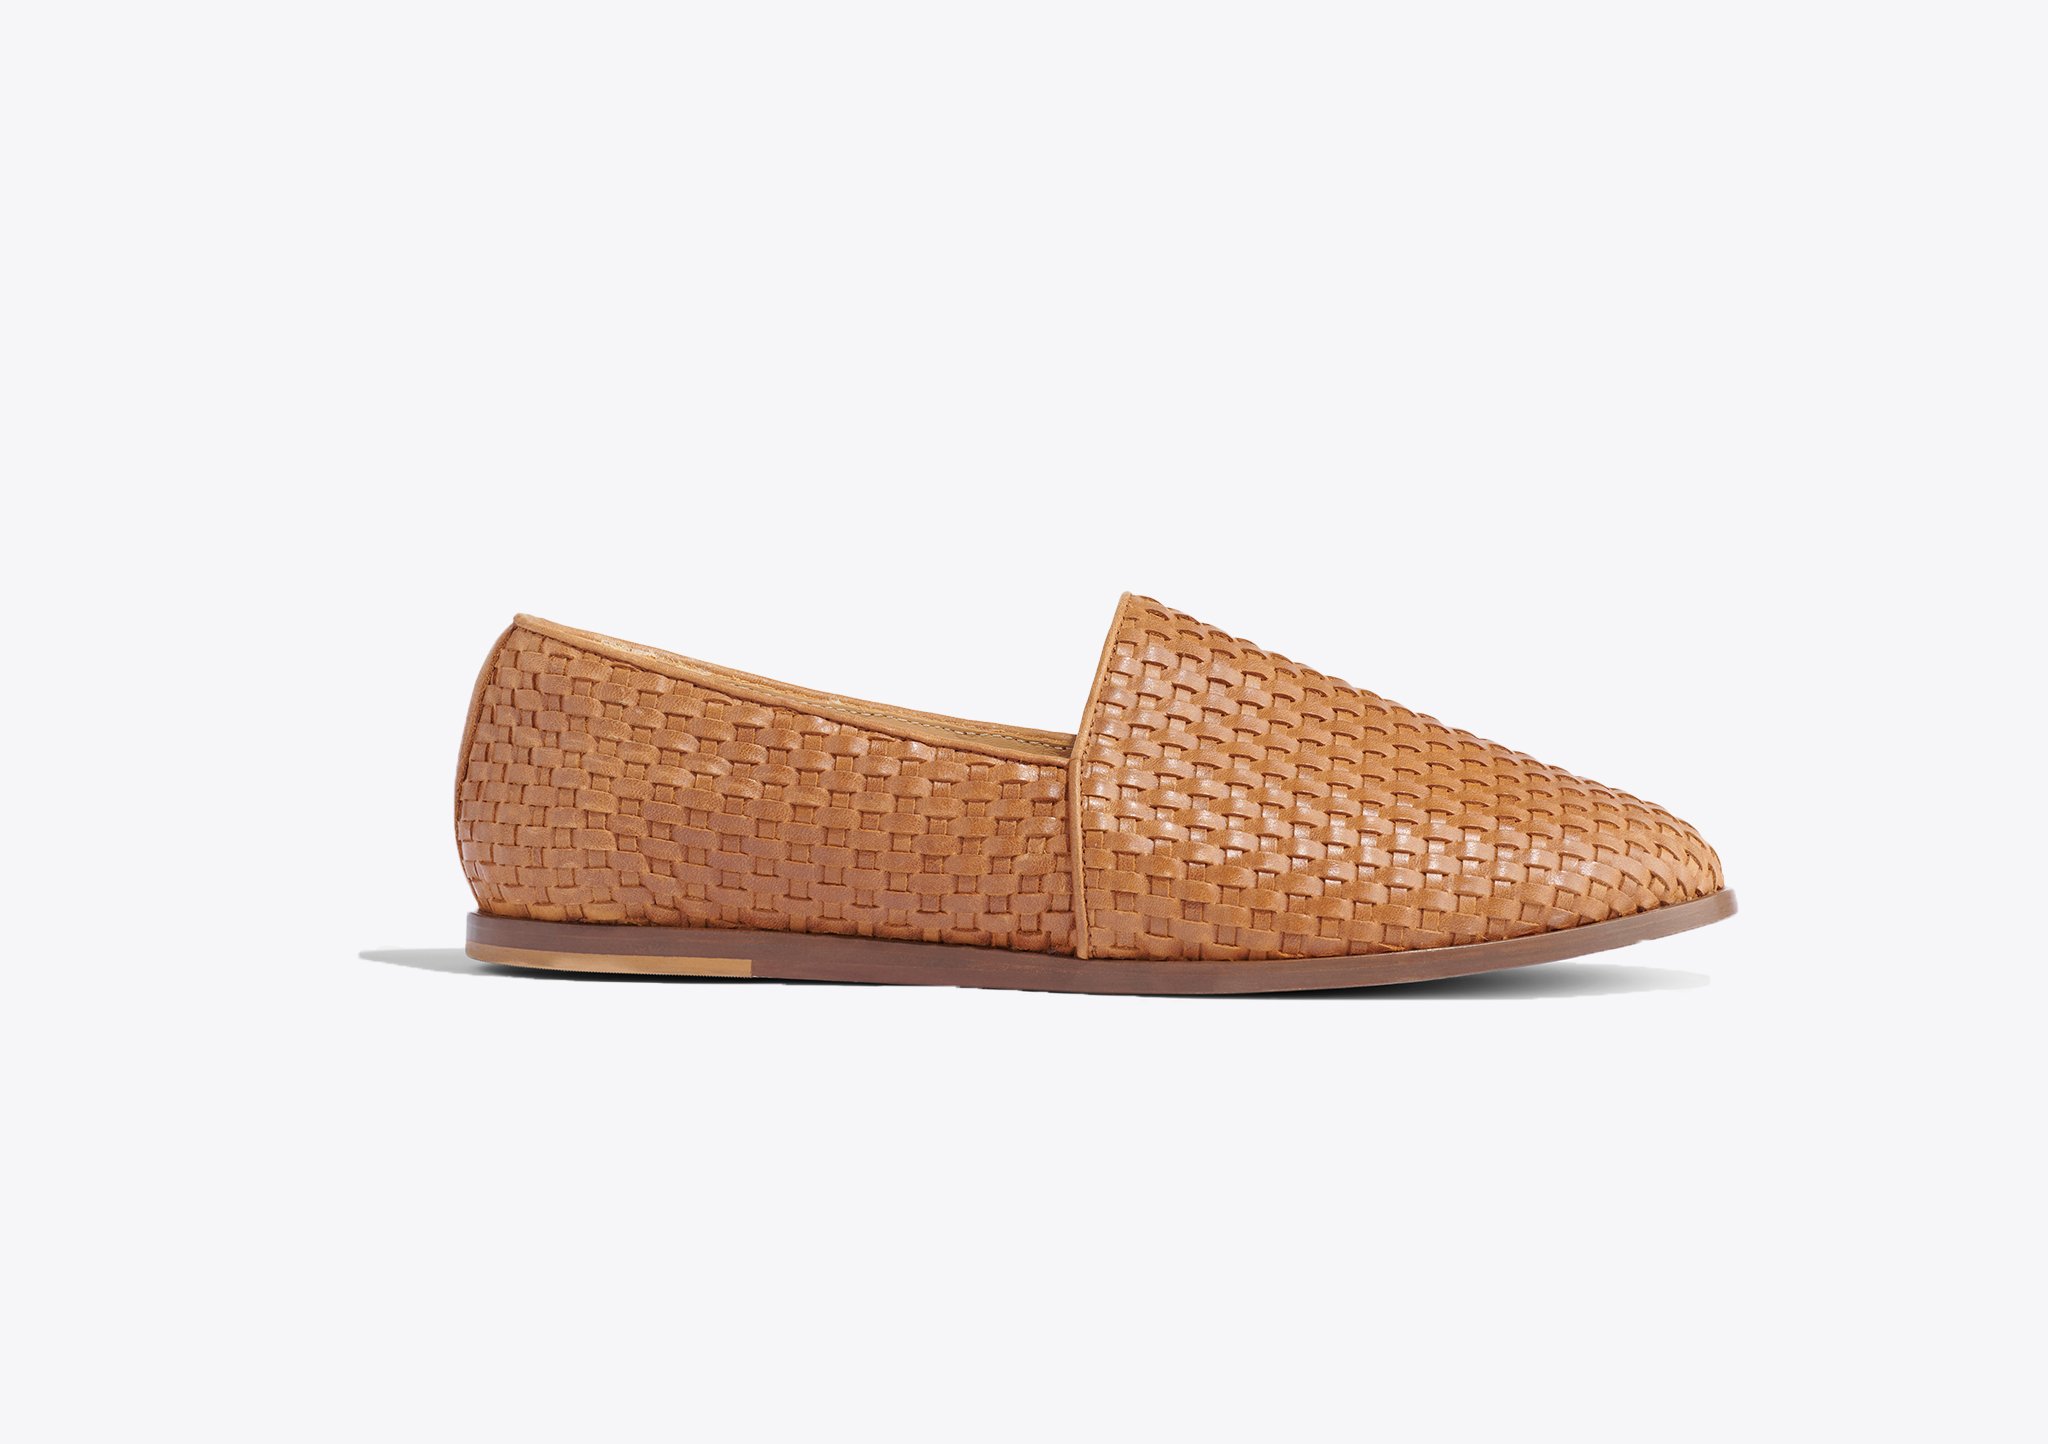 Nisolo Alejandro Woven Slip-On 2.0 Woven Brown - Every Nisolo product is built on the foundation of comfort, function, and design. 